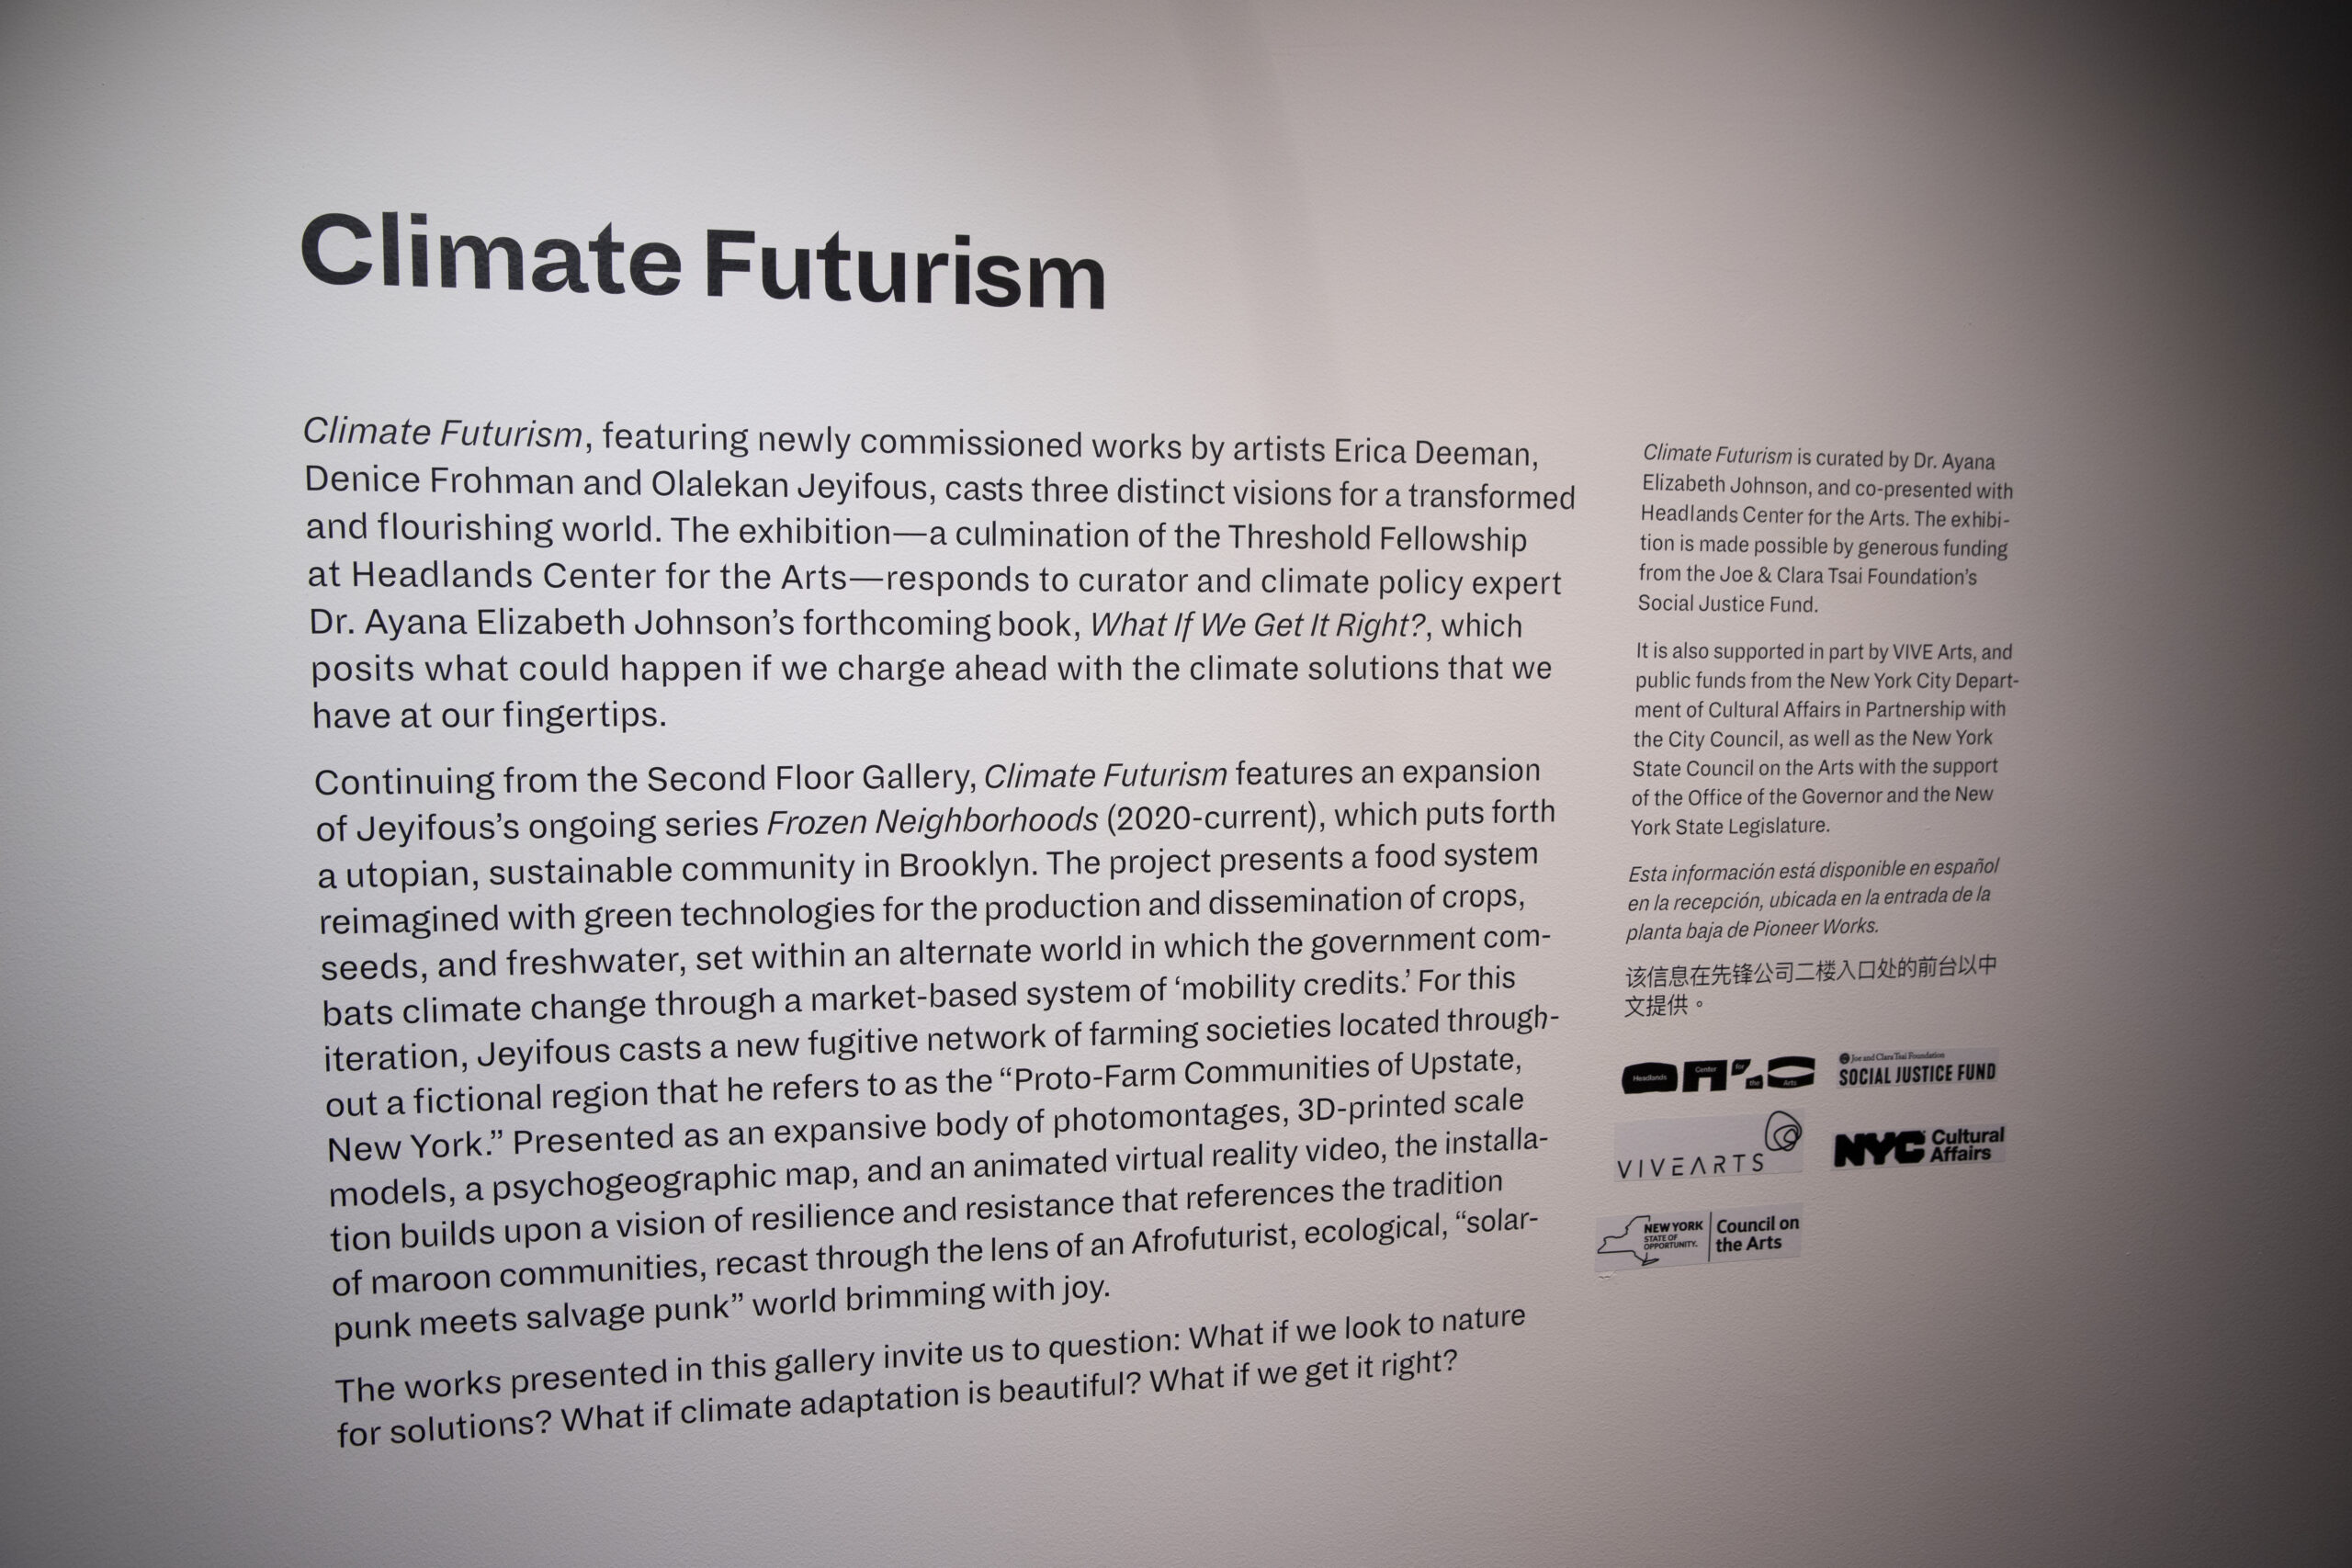 Explanation of the exhibit at Climate Futurism panel.